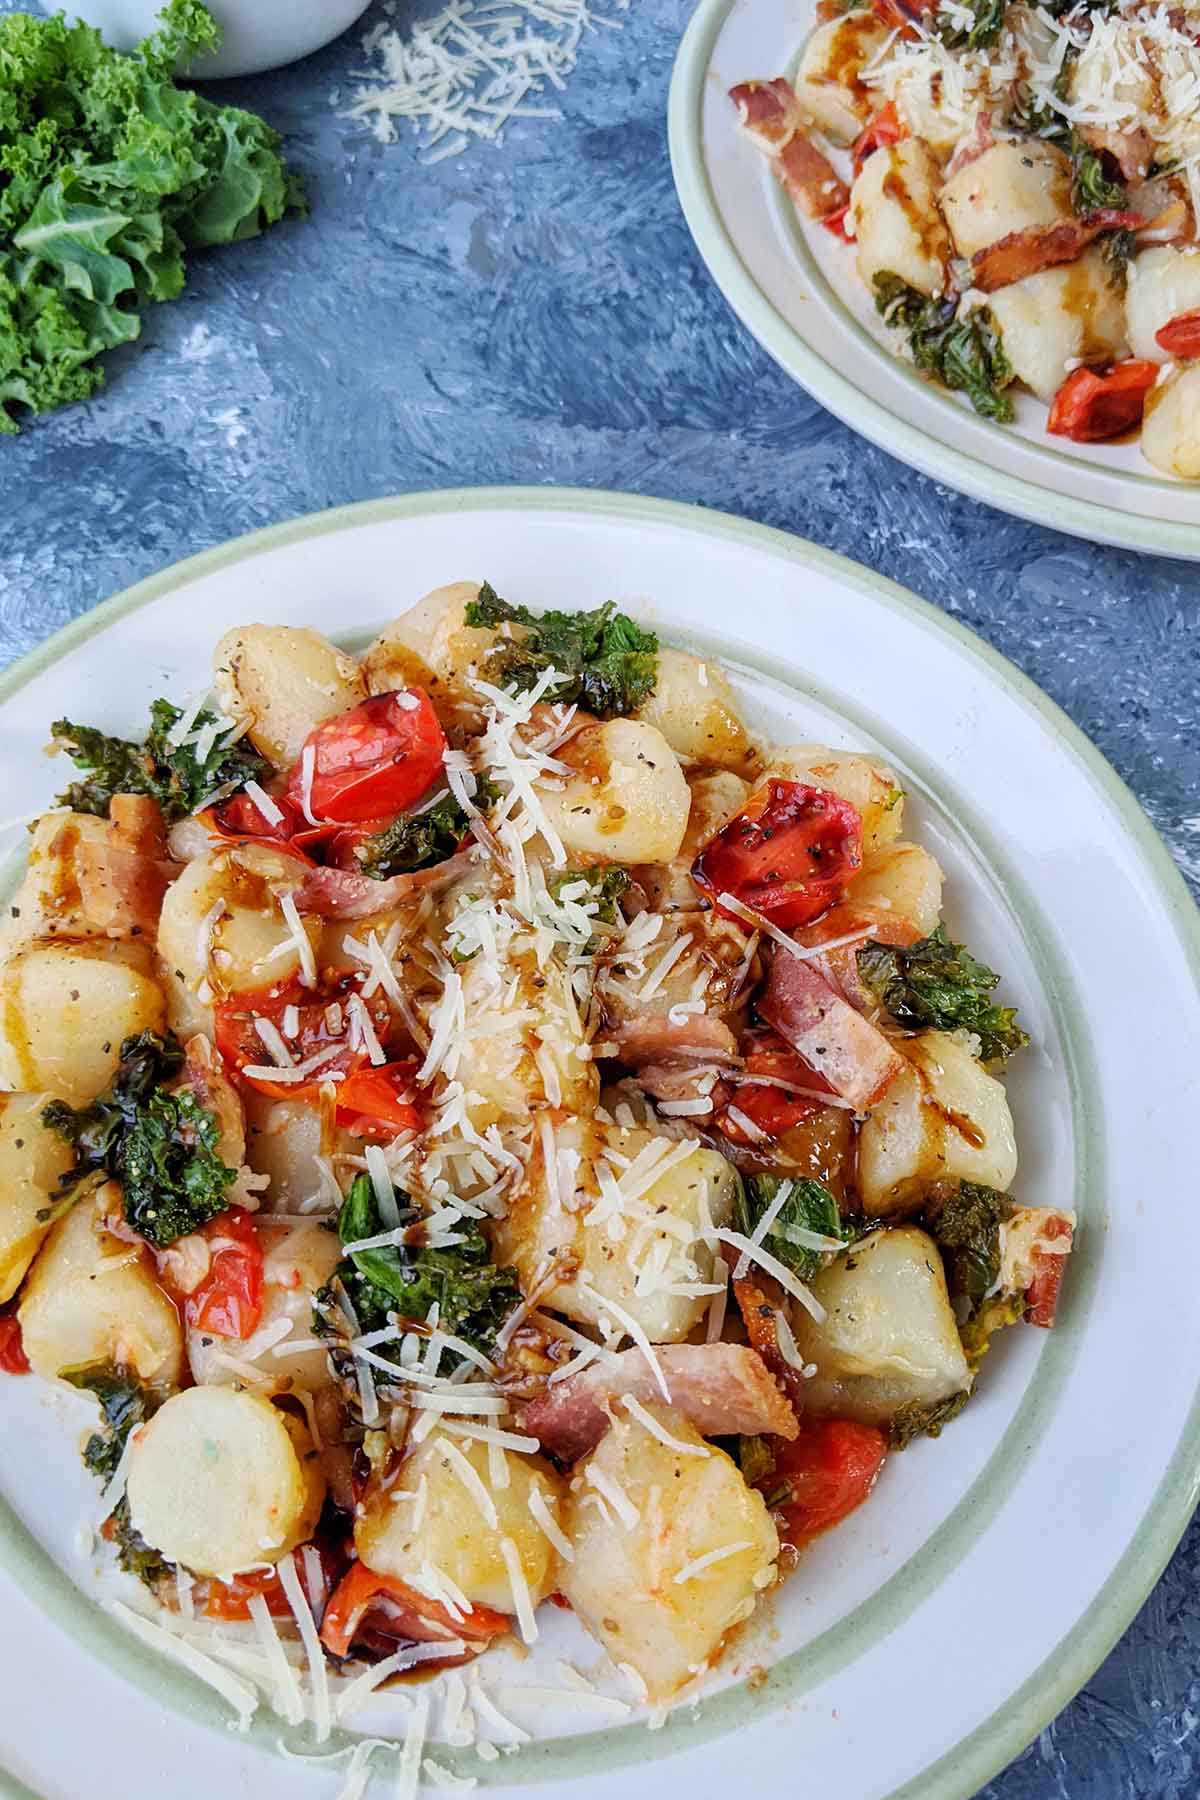 plate of gnocchi with kale and tomato.